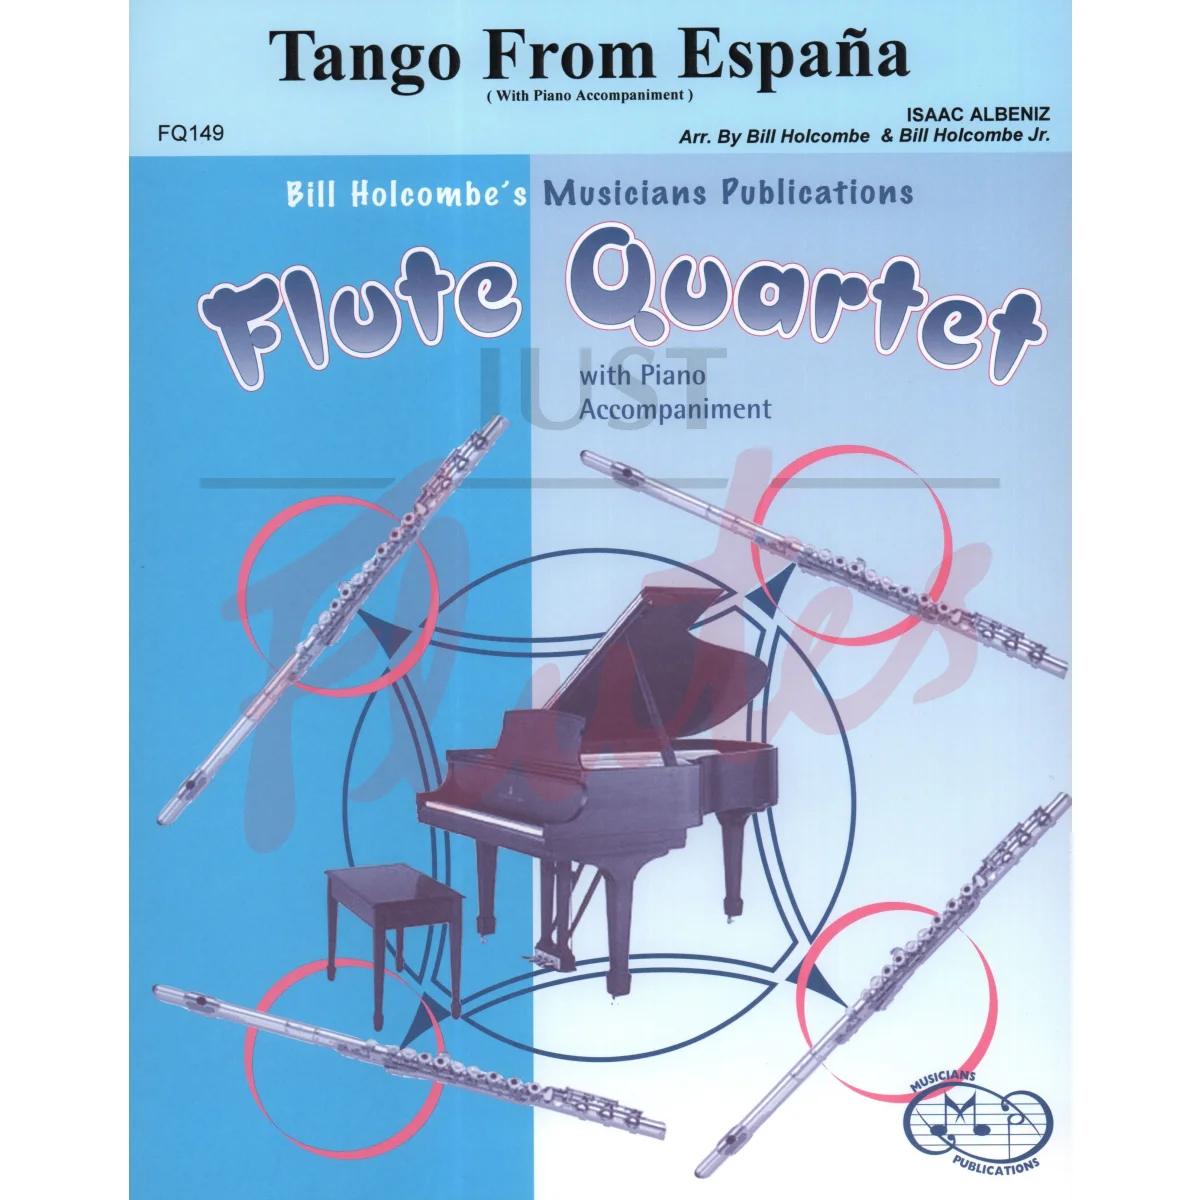 Tango From España for Four Flutes and Piano